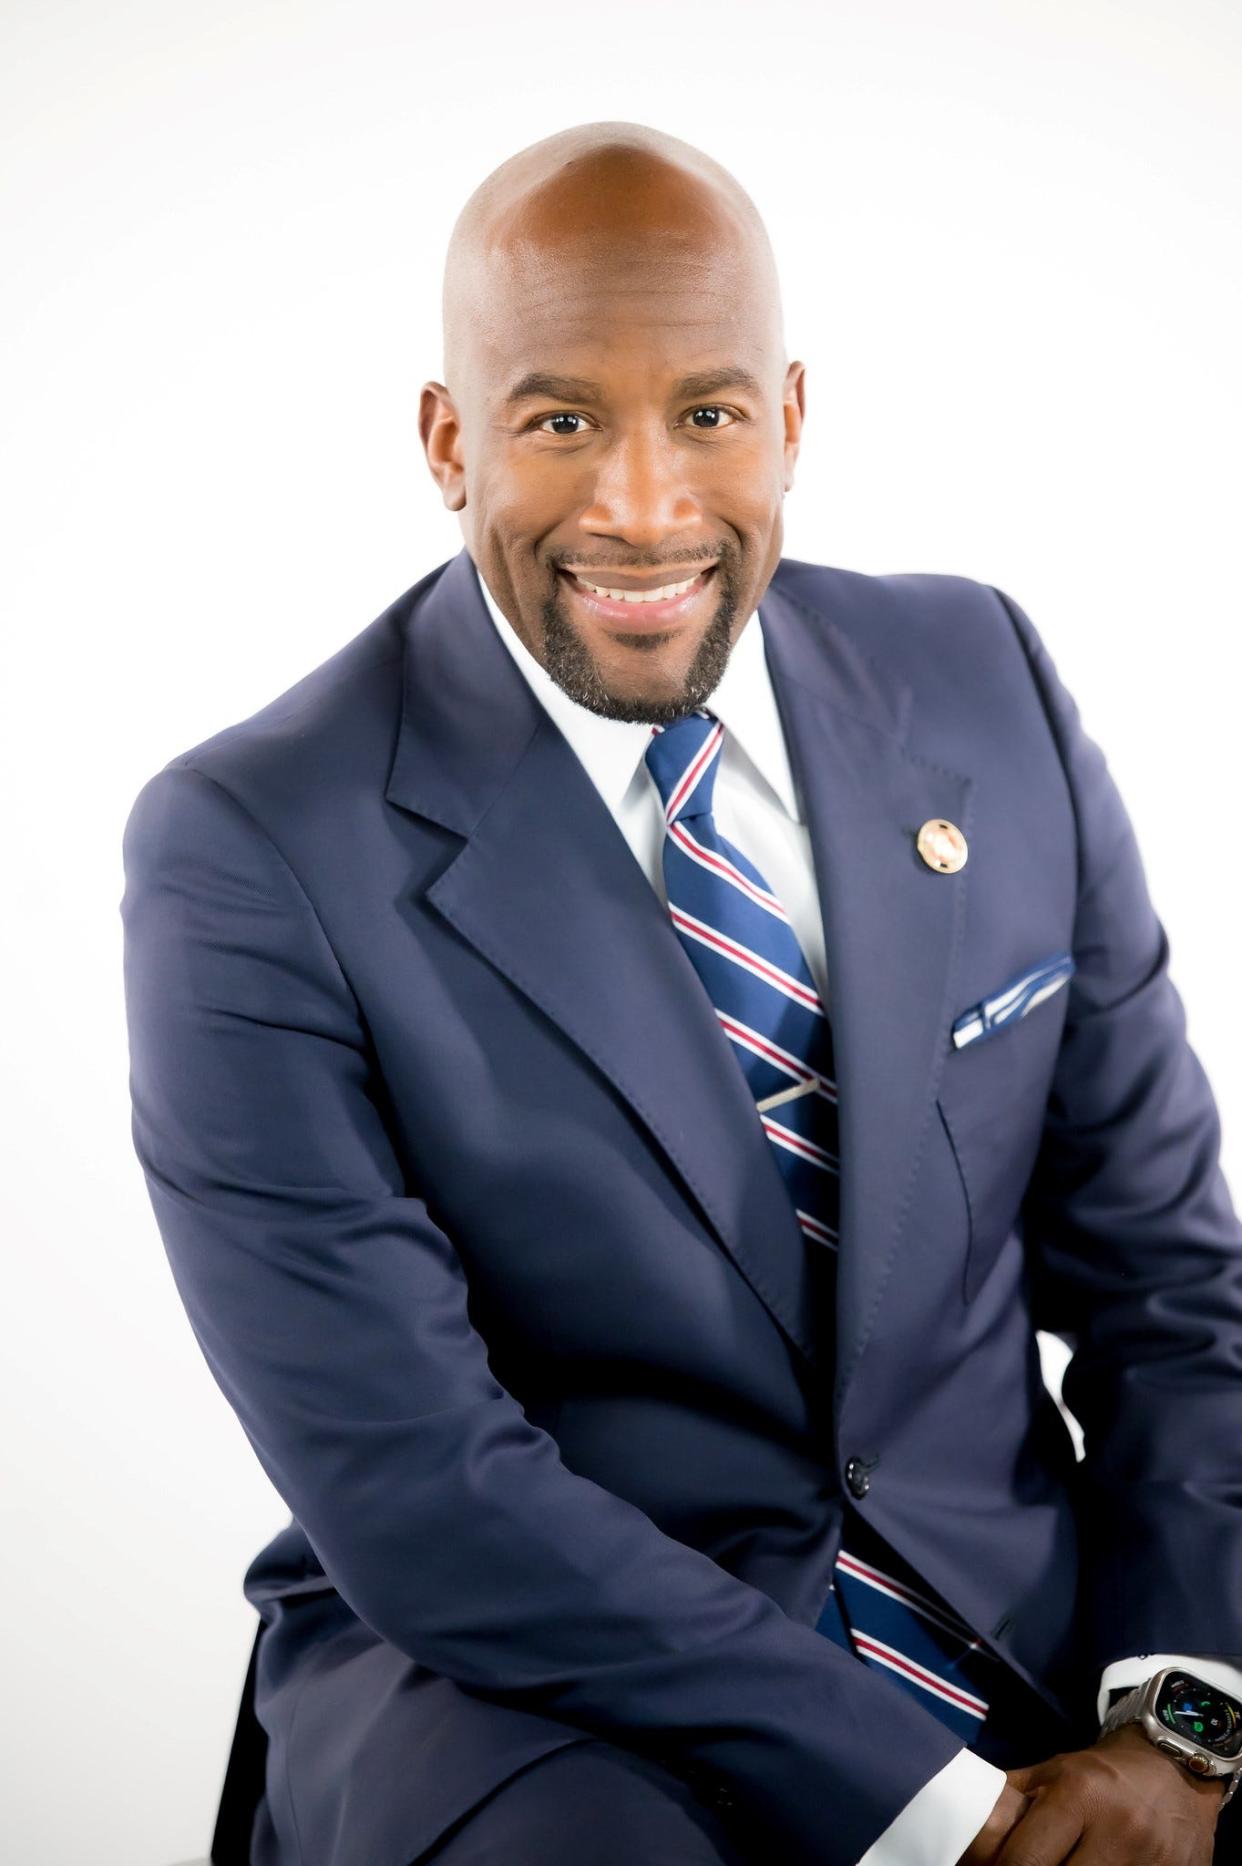 Quacy Smith plans to run as a Democrat and challenge Republican Rep. Paul Gosar in Arizona's Ninth Congressional District.